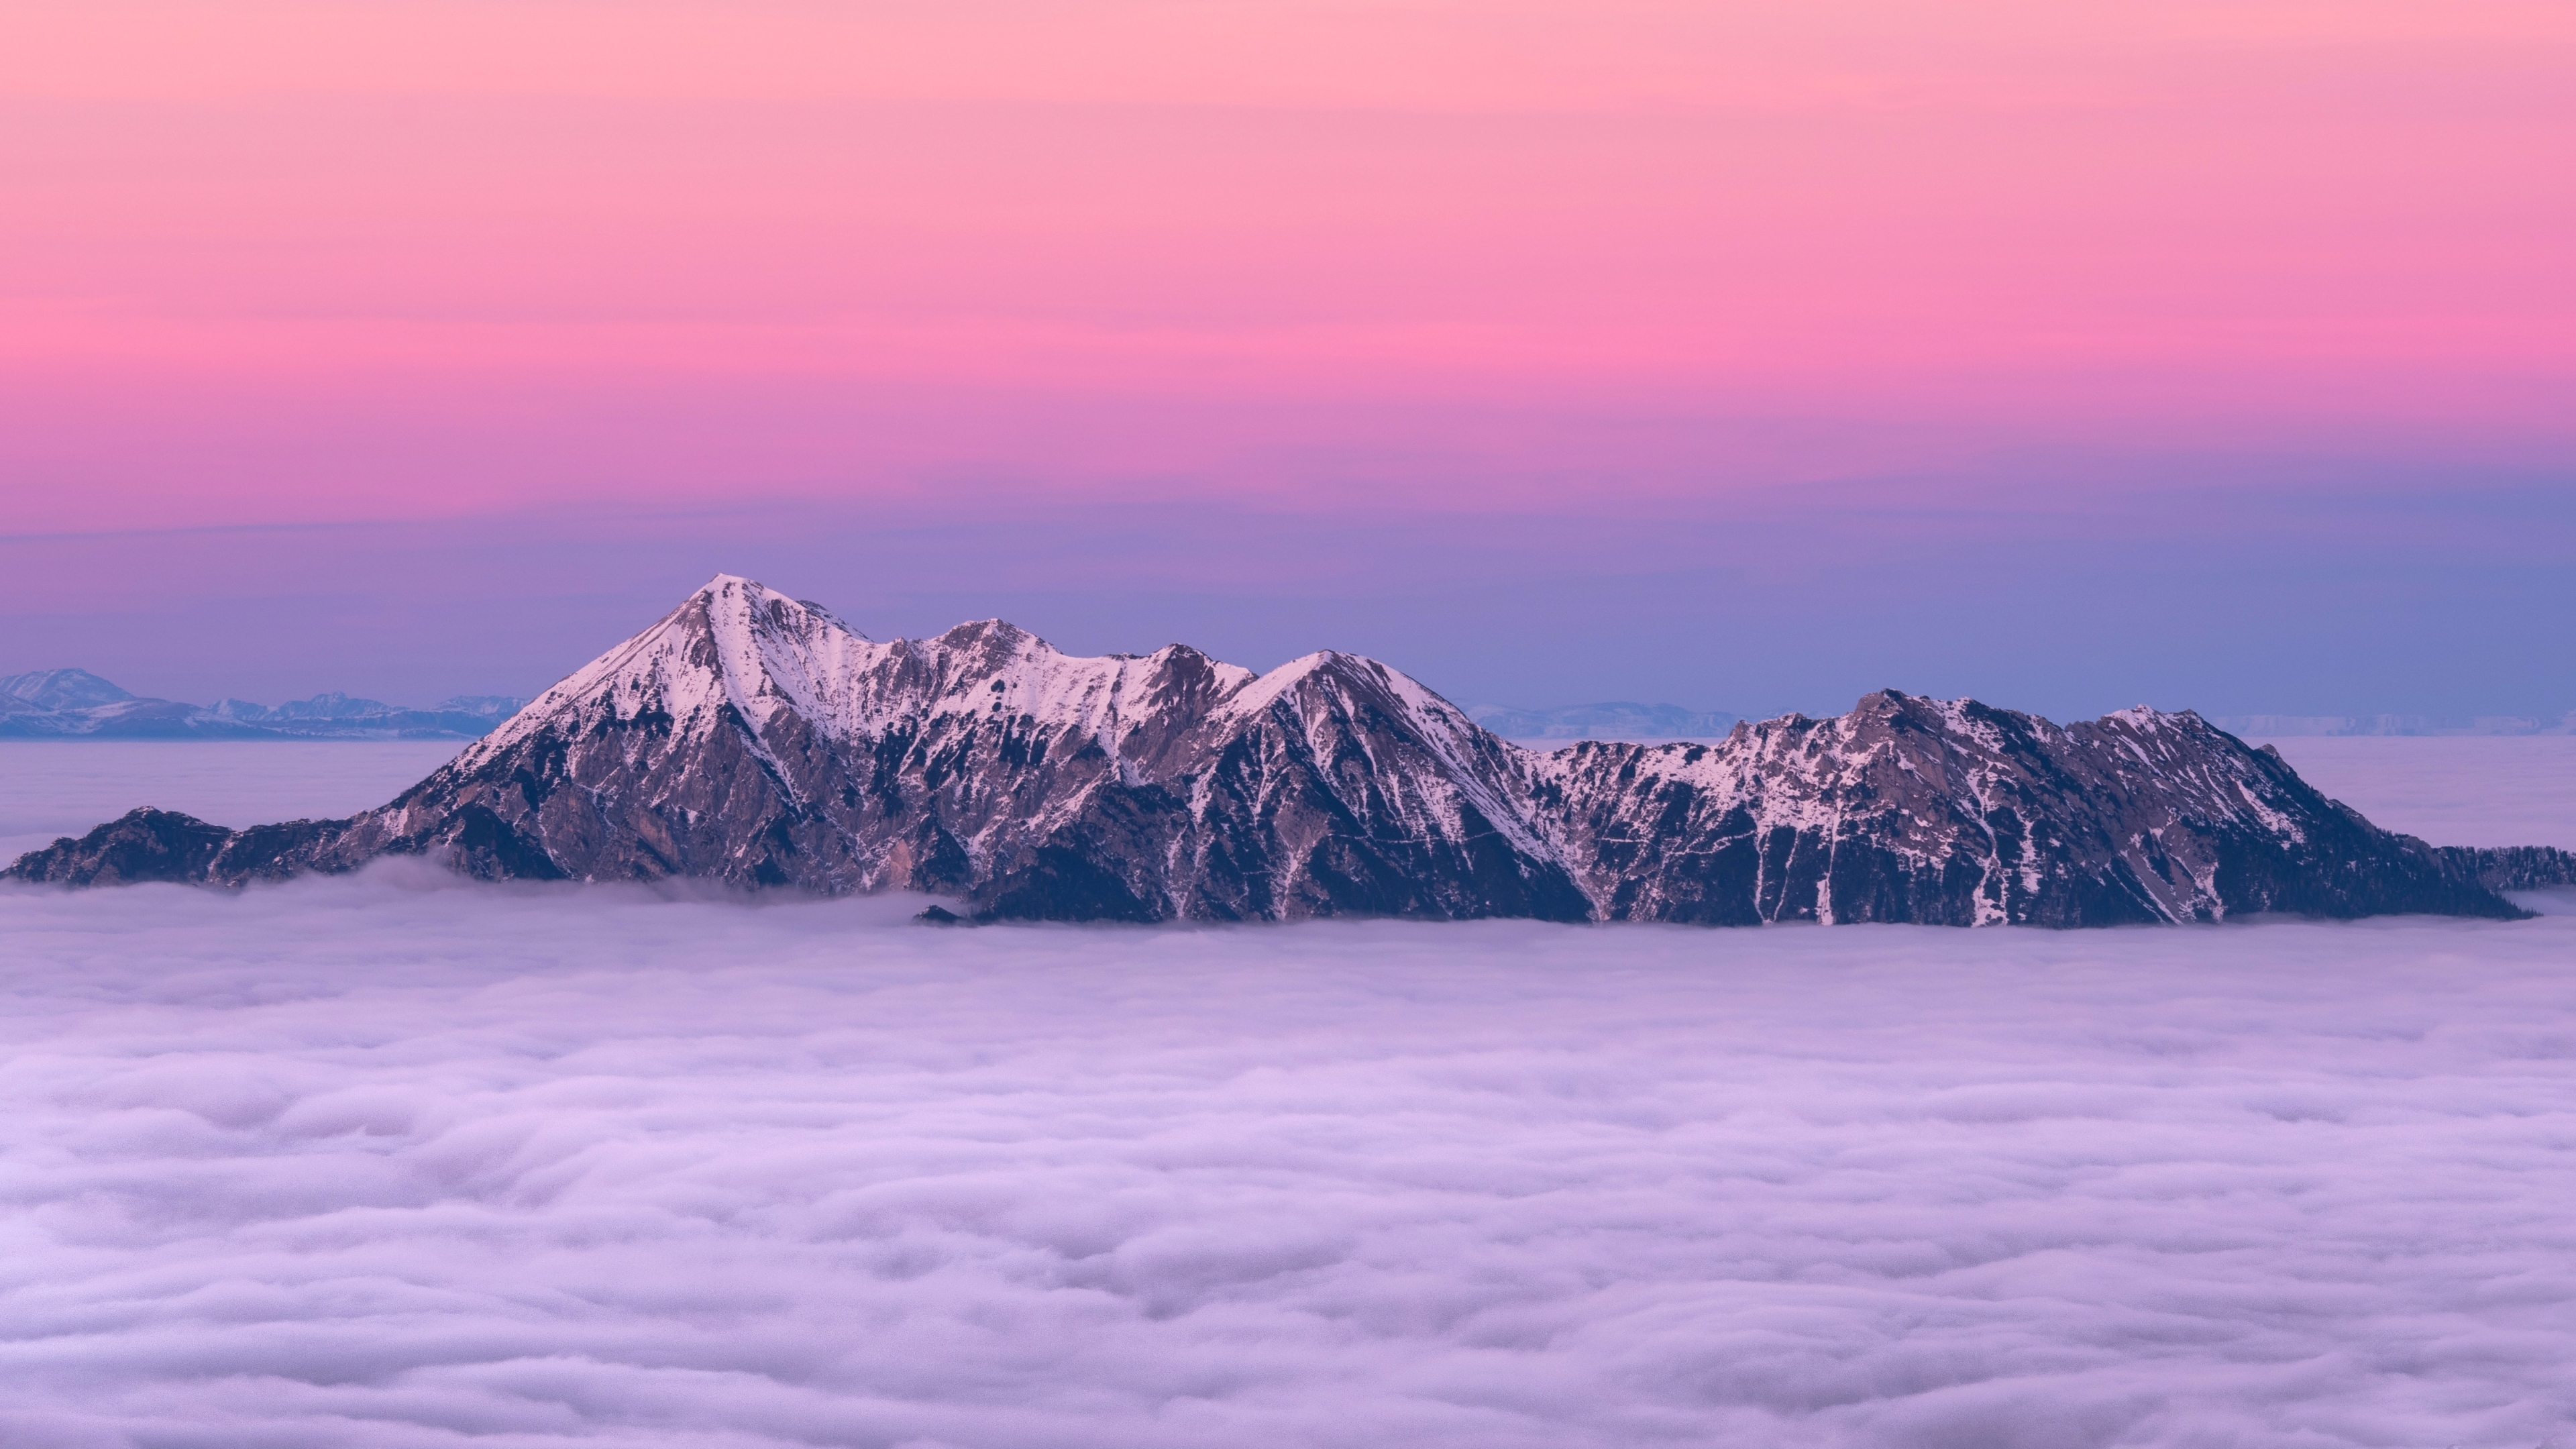 3840x2160 Mountain Peaks Fog And Pink Clouds 4k Wallpaper Hd Nature 4k